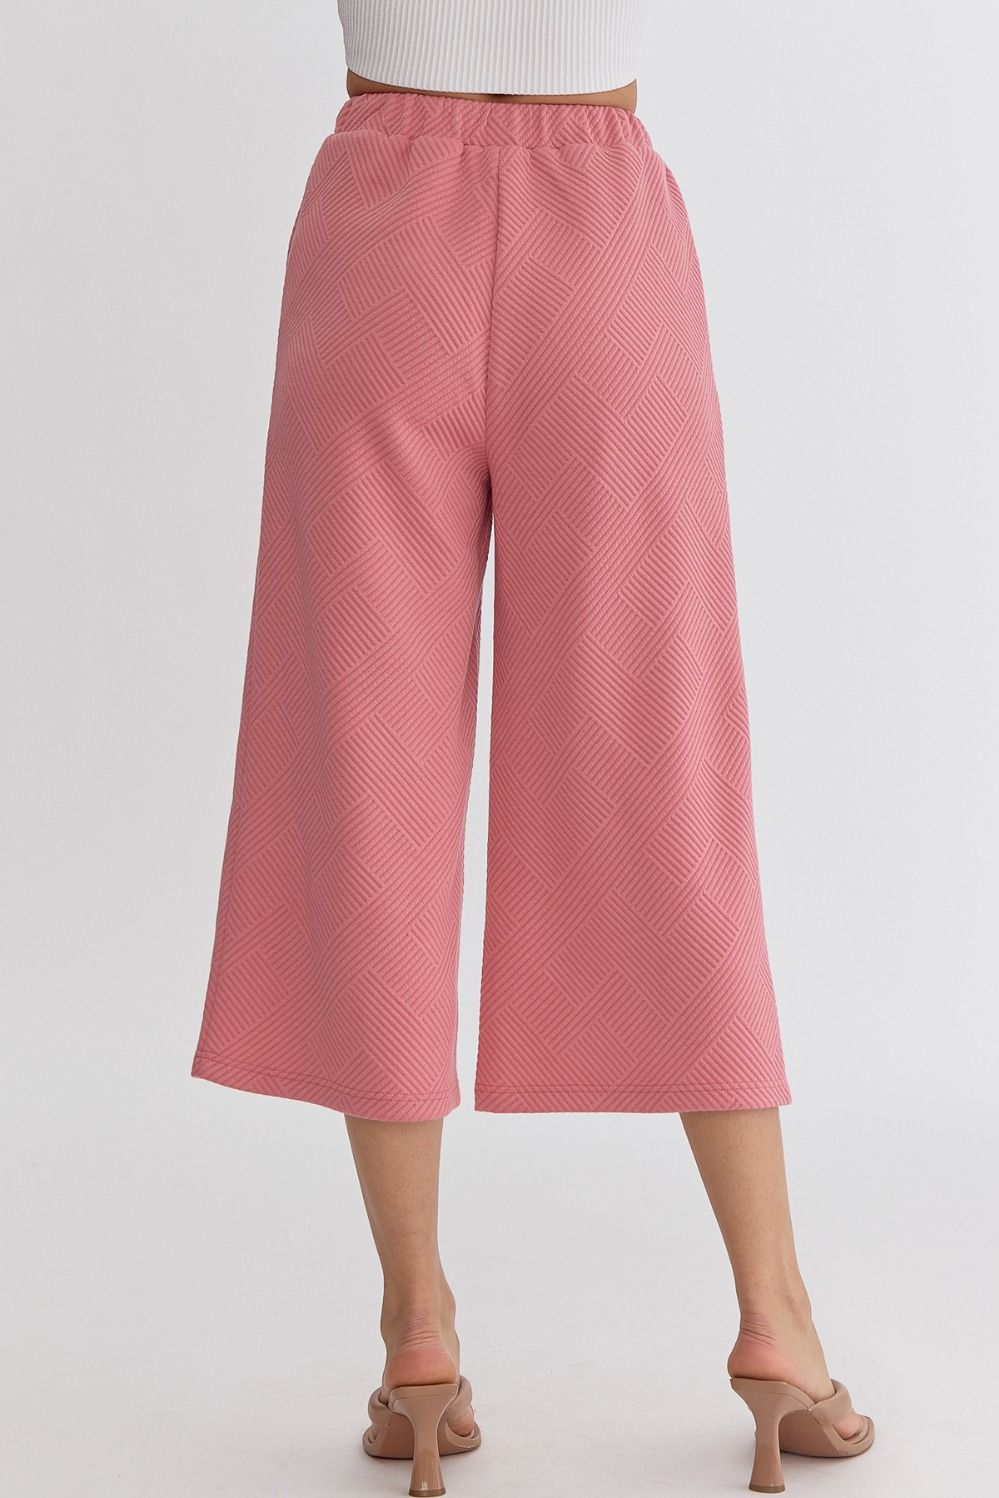 Gracie Textured Cropped Knit Pants FINAL SALE